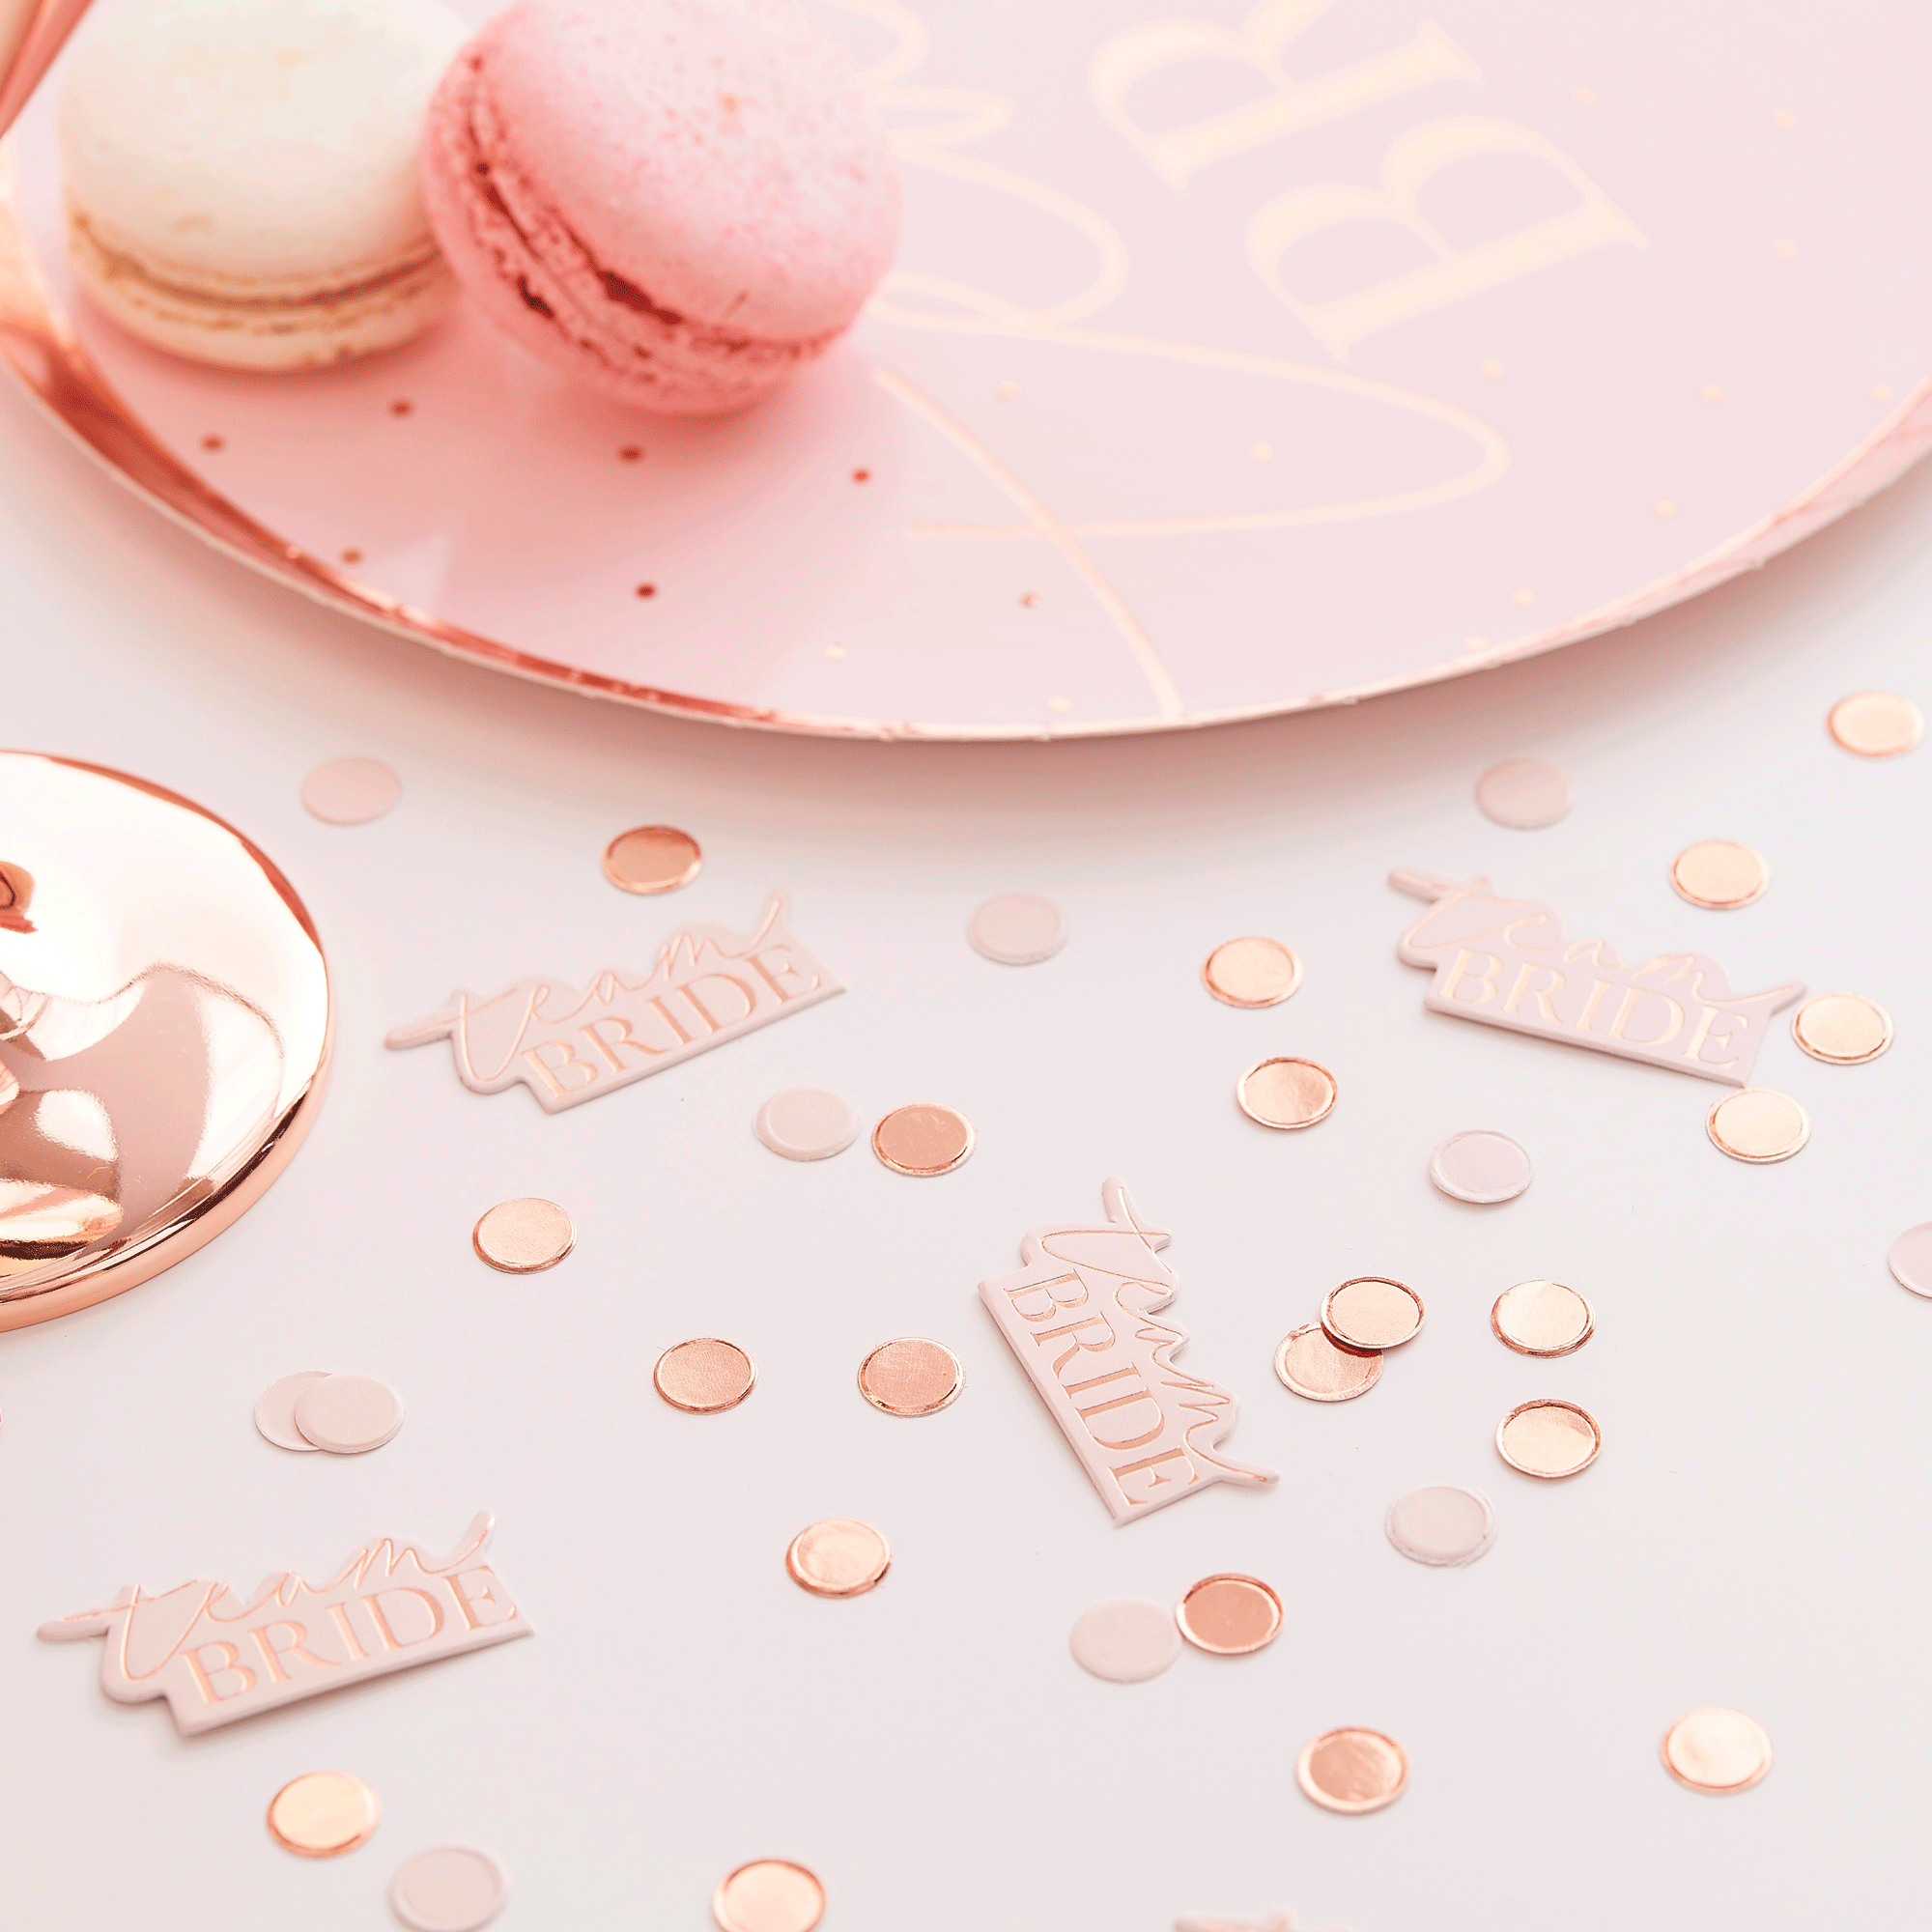 Team Bride Blush and Rose gold Hen Party Confetti